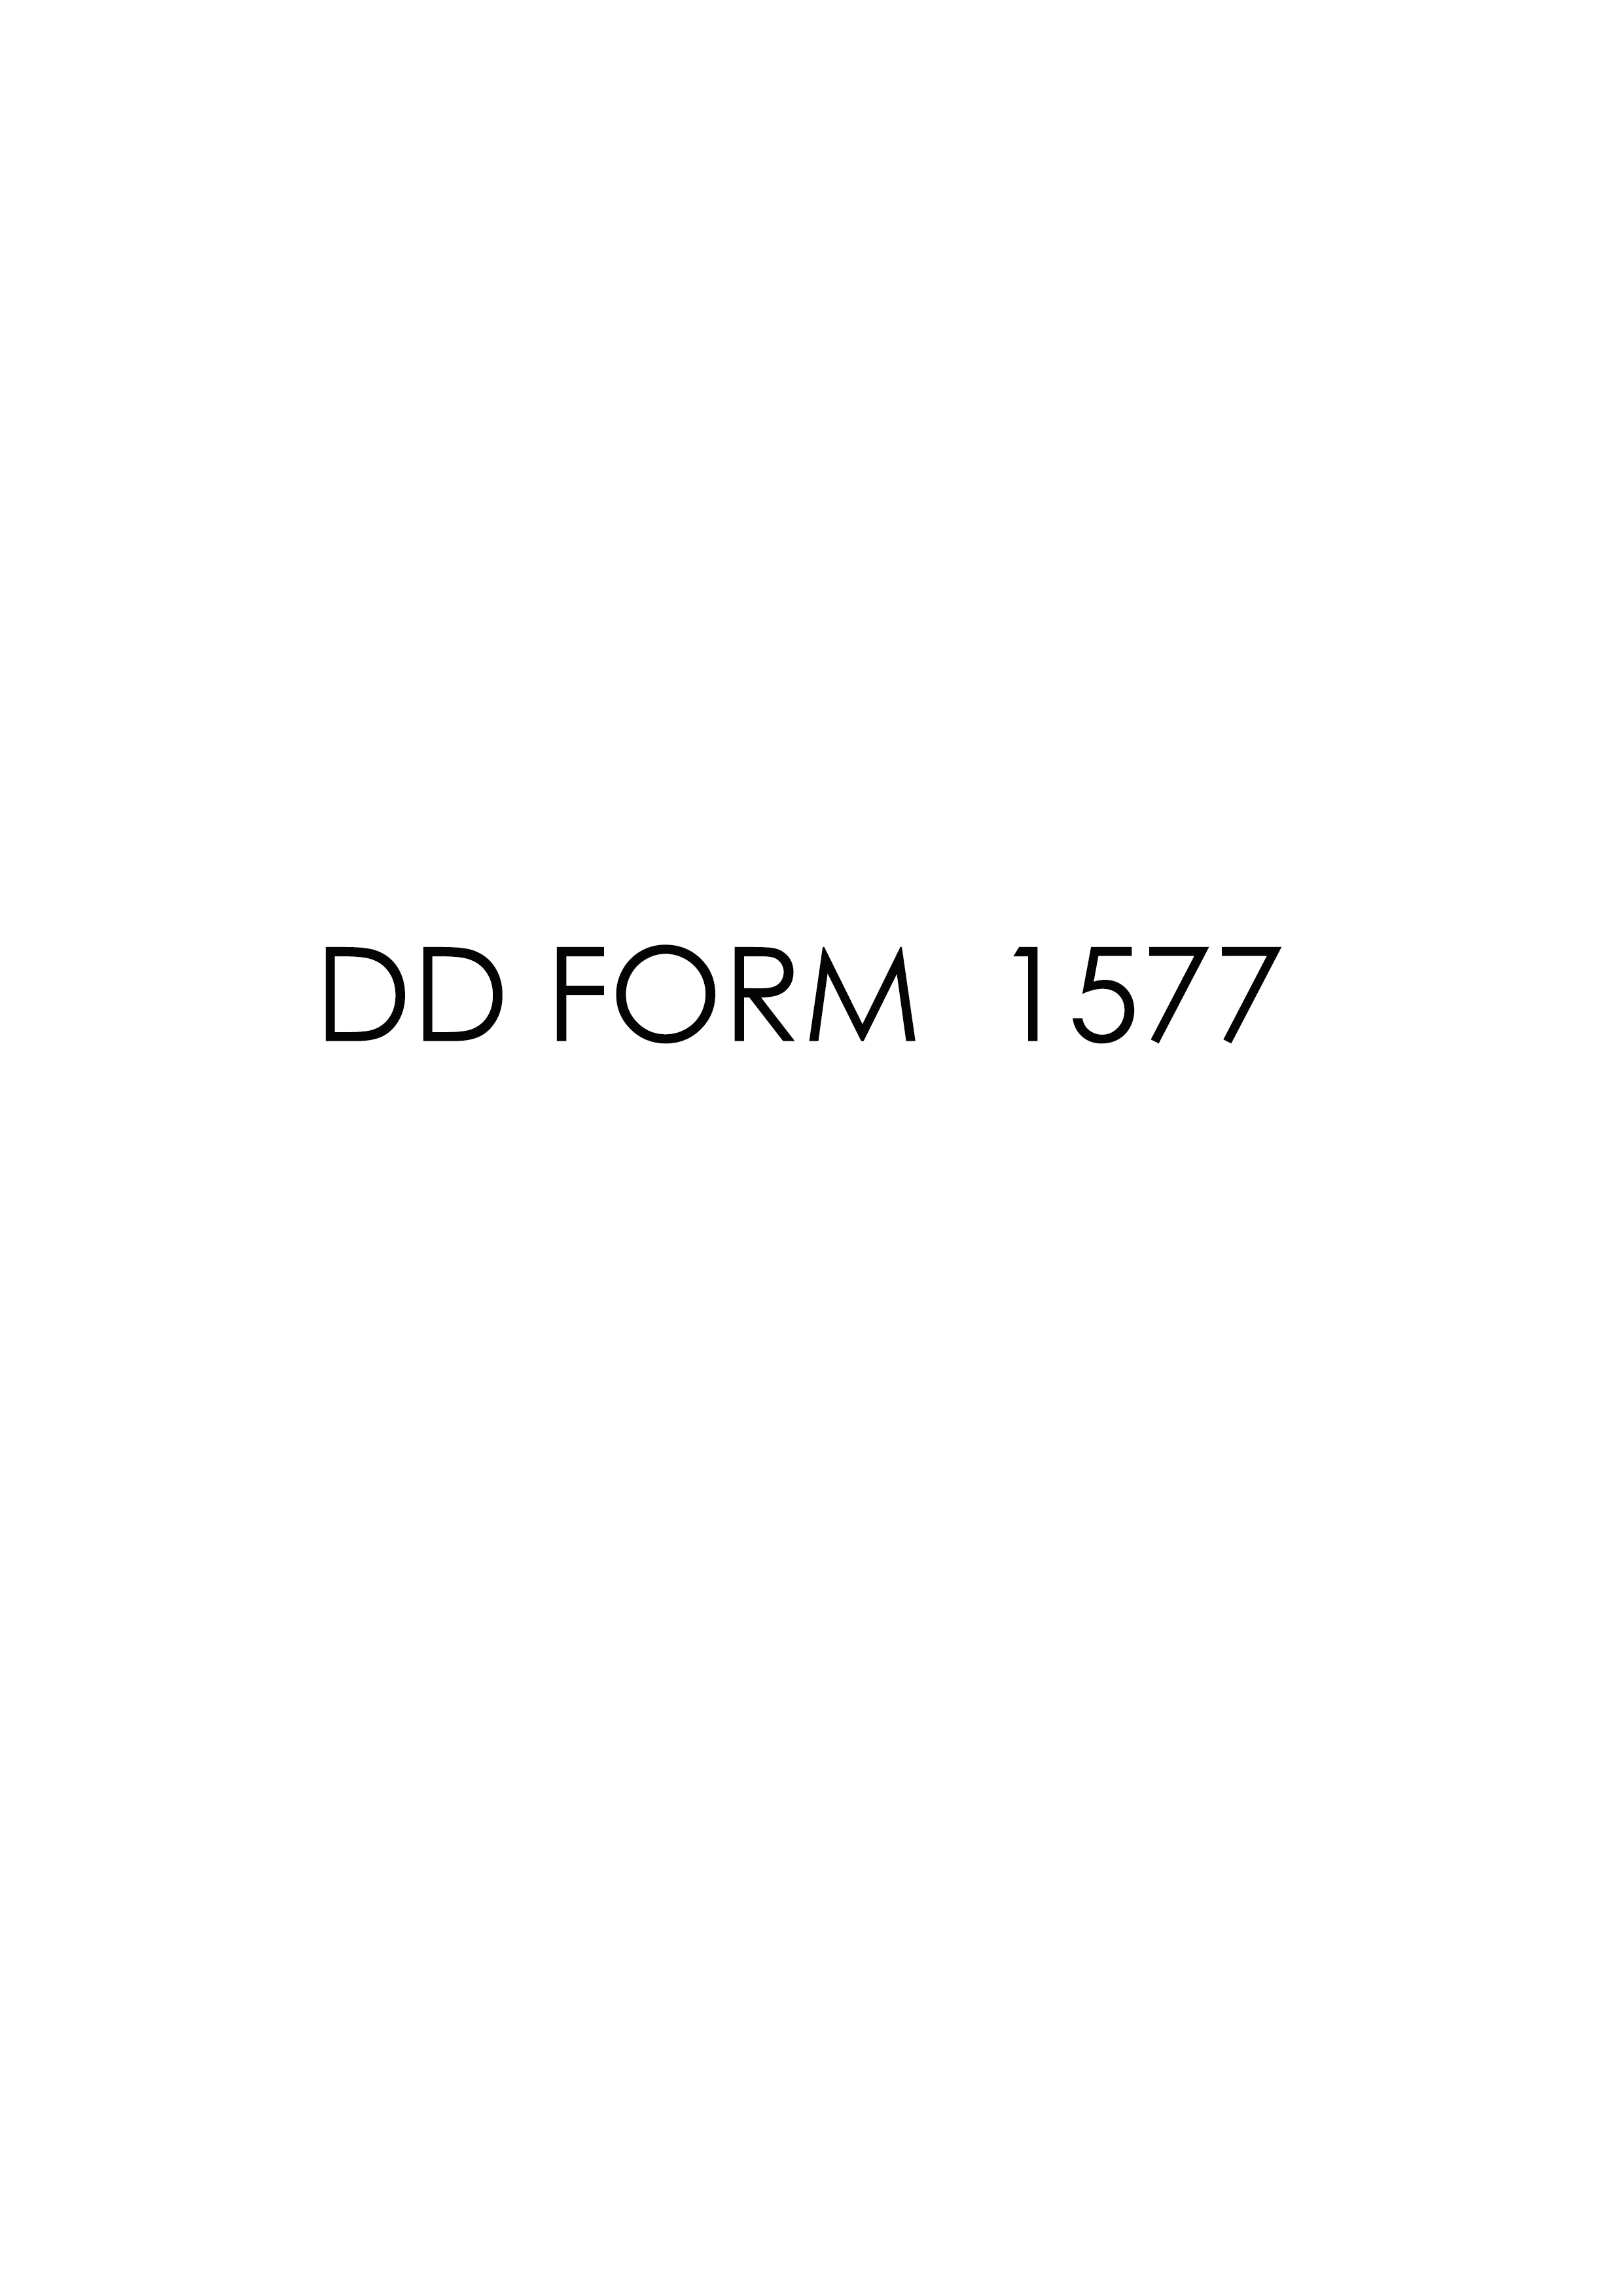 Download Fillable dd Form 1577